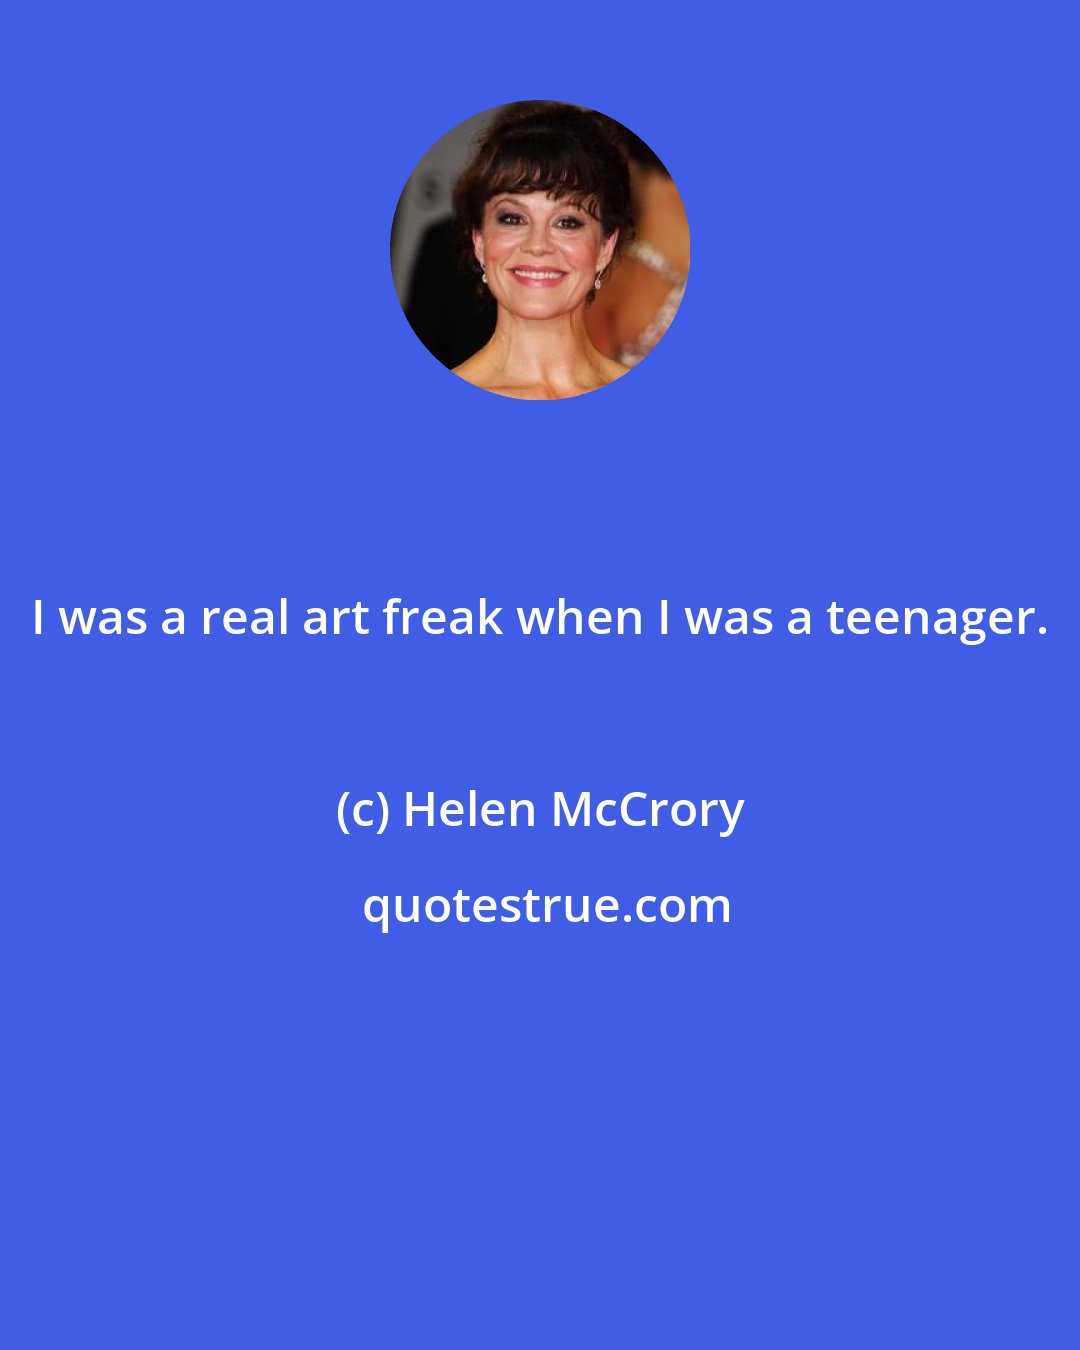 Helen McCrory: I was a real art freak when I was a teenager.